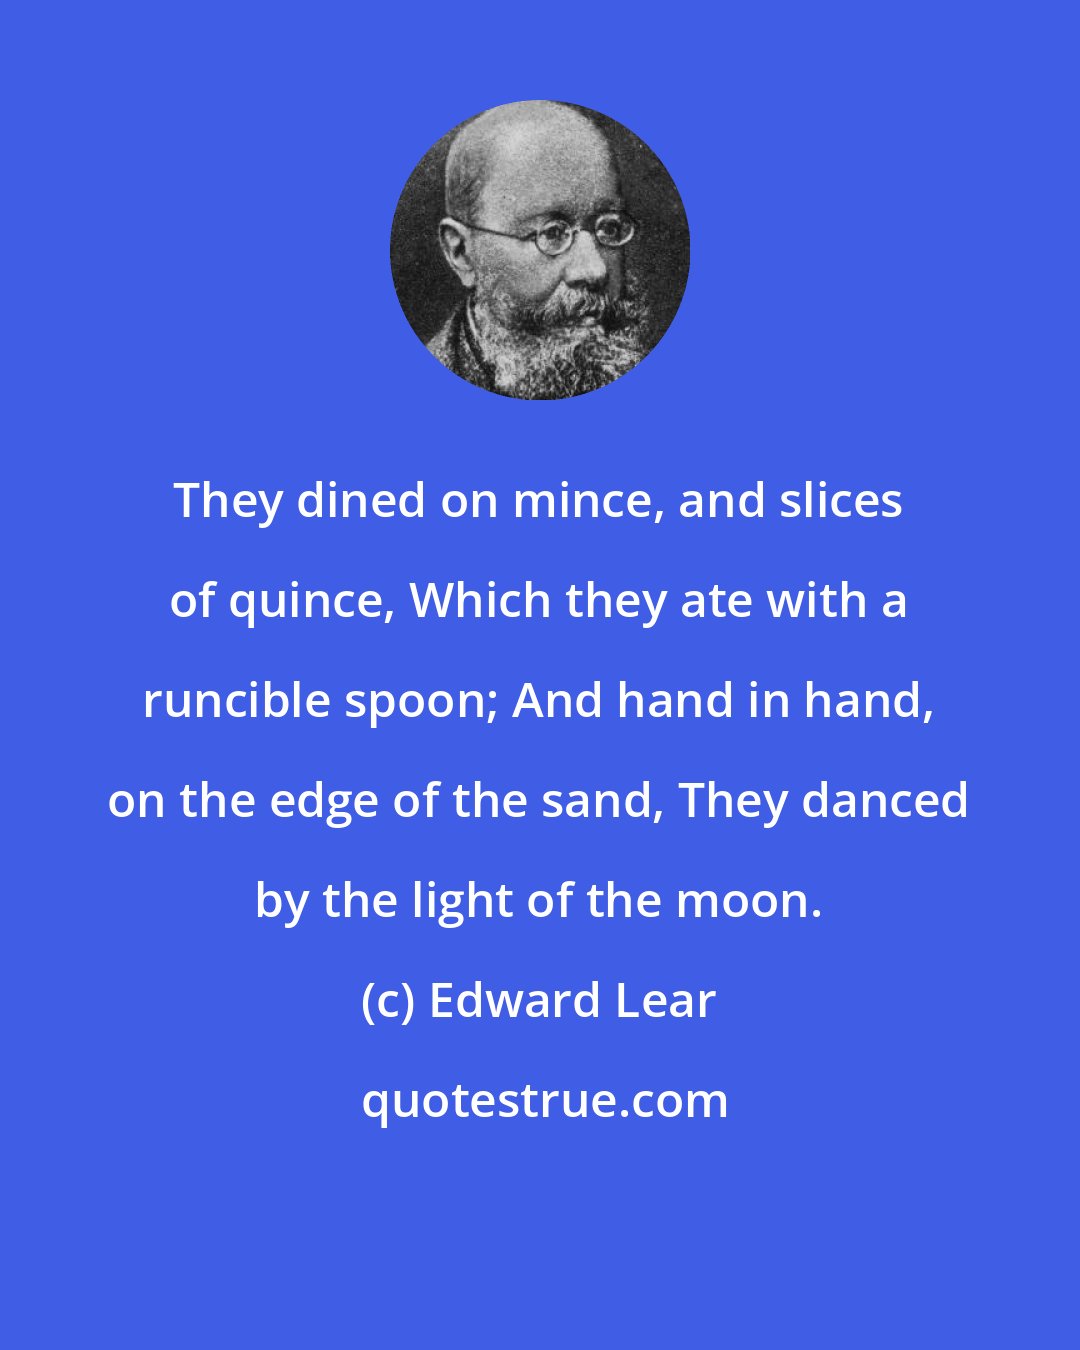 Edward Lear: They dined on mince, and slices of quince, Which they ate with a runcible spoon; And hand in hand, on the edge of the sand, They danced by the light of the moon.